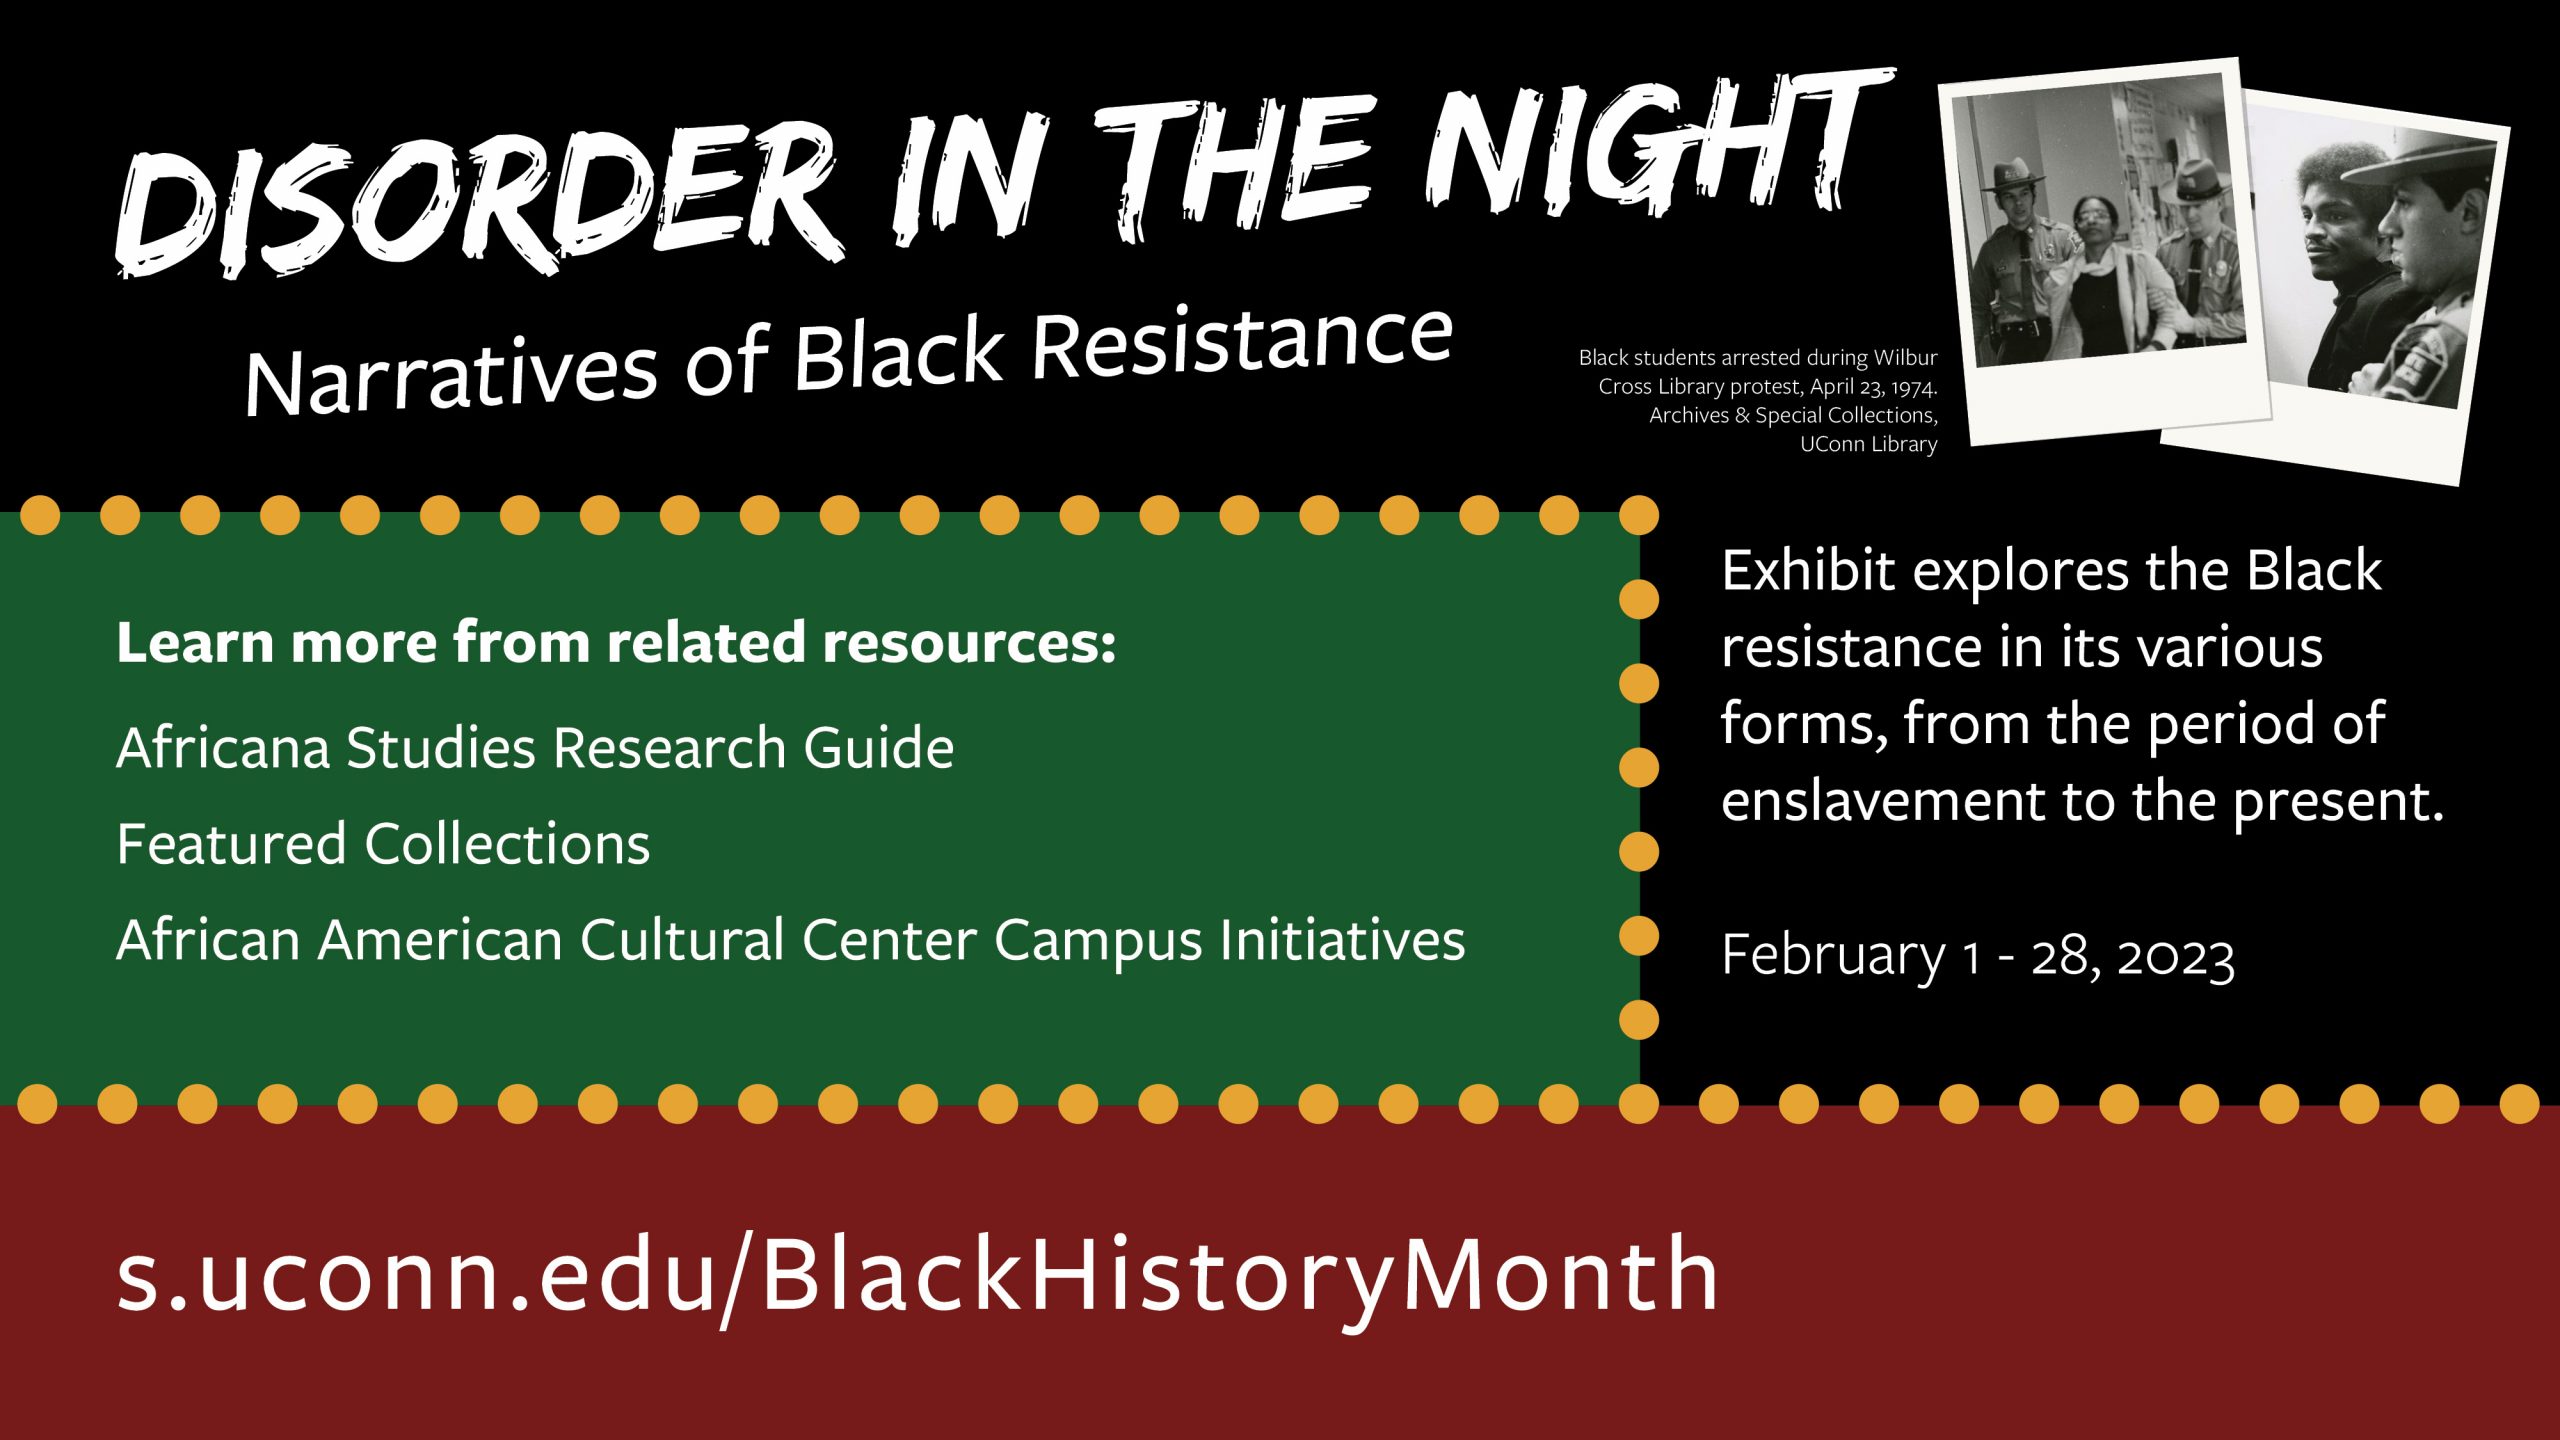 Marketing image with background of black, red and green color blocks with yellow dots, and the text: Disorder in the Night: Narratives of Black Resistance. Exhibit explores the Black resistance in its various forms, from the period of enslavement to the present. February 1 - 28, 2023. Learn more from related resources: Africana Studies Research Guide, Featured Collections, and African American Cultural Center Campus Initiatives. (top right has two historic photos of black students arrested during Wilbur Cross Library protest, April 23, 1974.) s.uconn.edu/BlackHistoryMonth